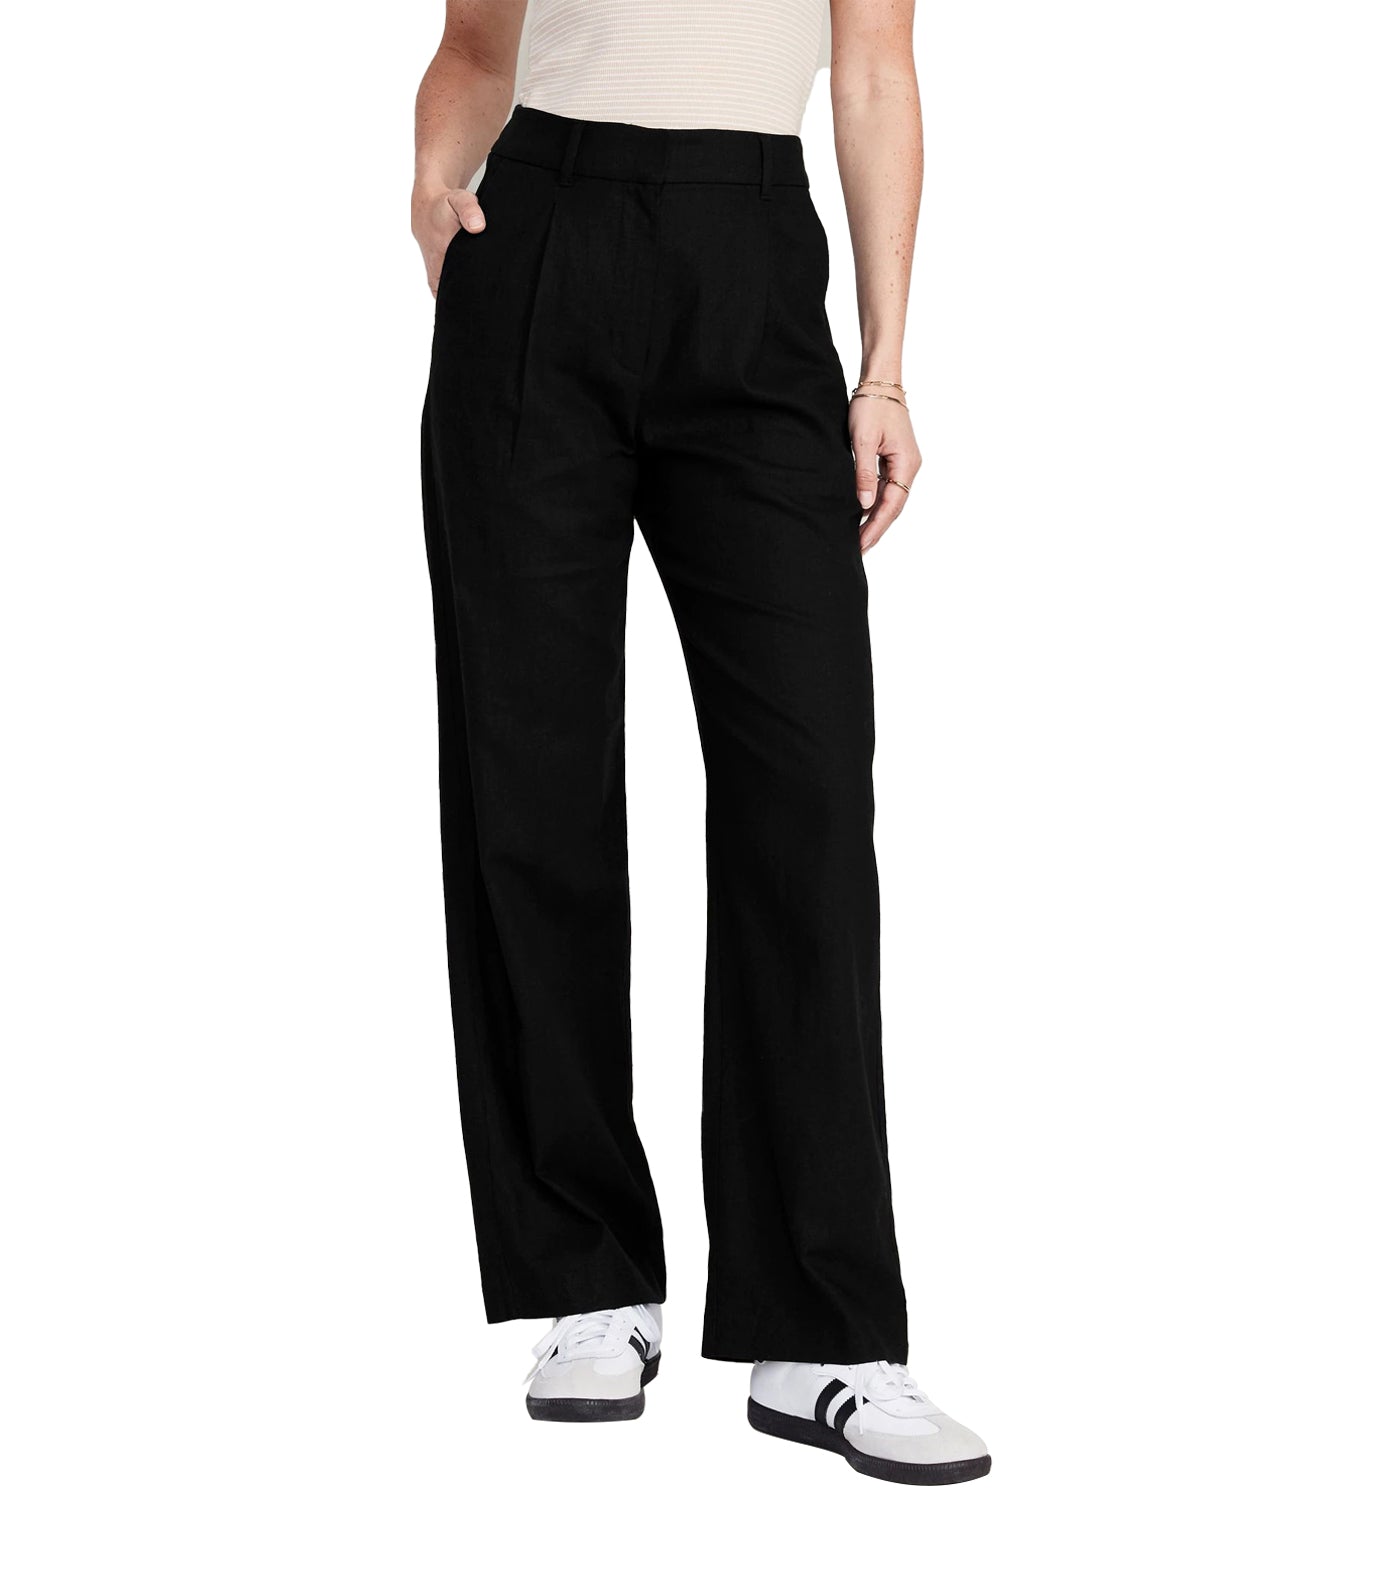 Extra High-Waisted Pleated Linen-Blend Wide-Leg Trouser Suit Pants for Women Black Jack